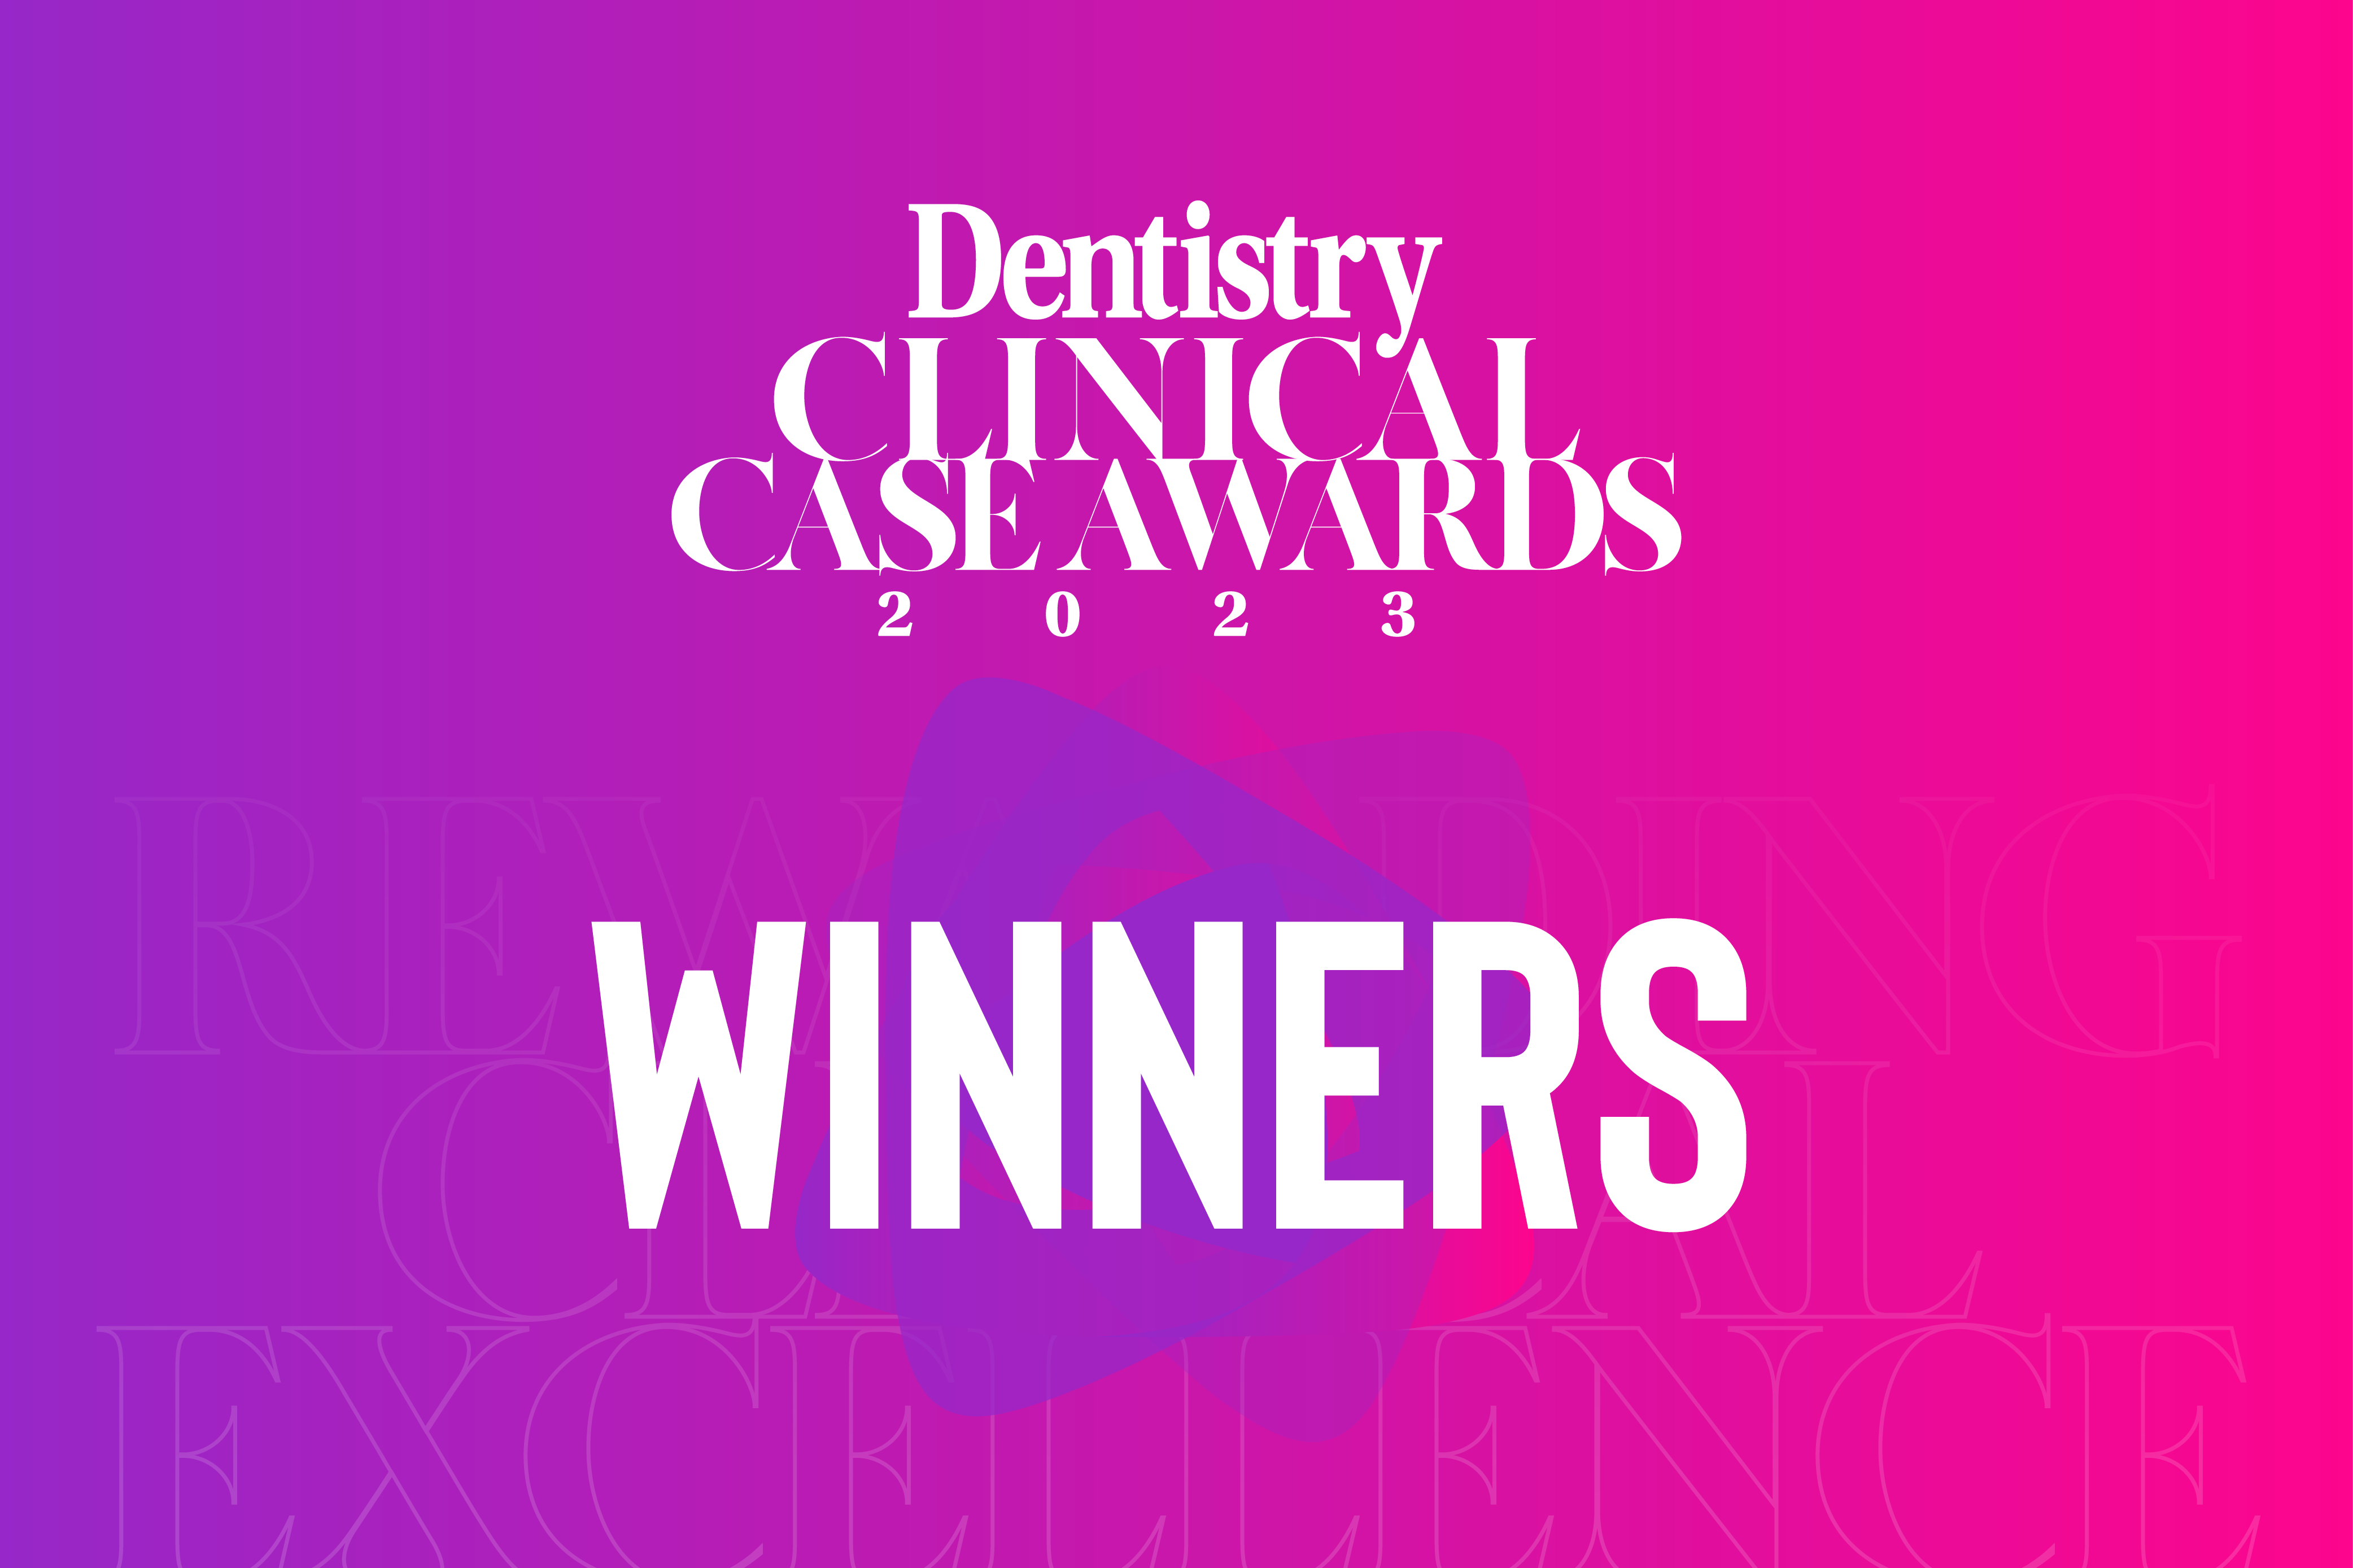 Presenting the winners of this year’s Dentistry Clinical Case Awards – have a look at the full list of winners and highly commended here.